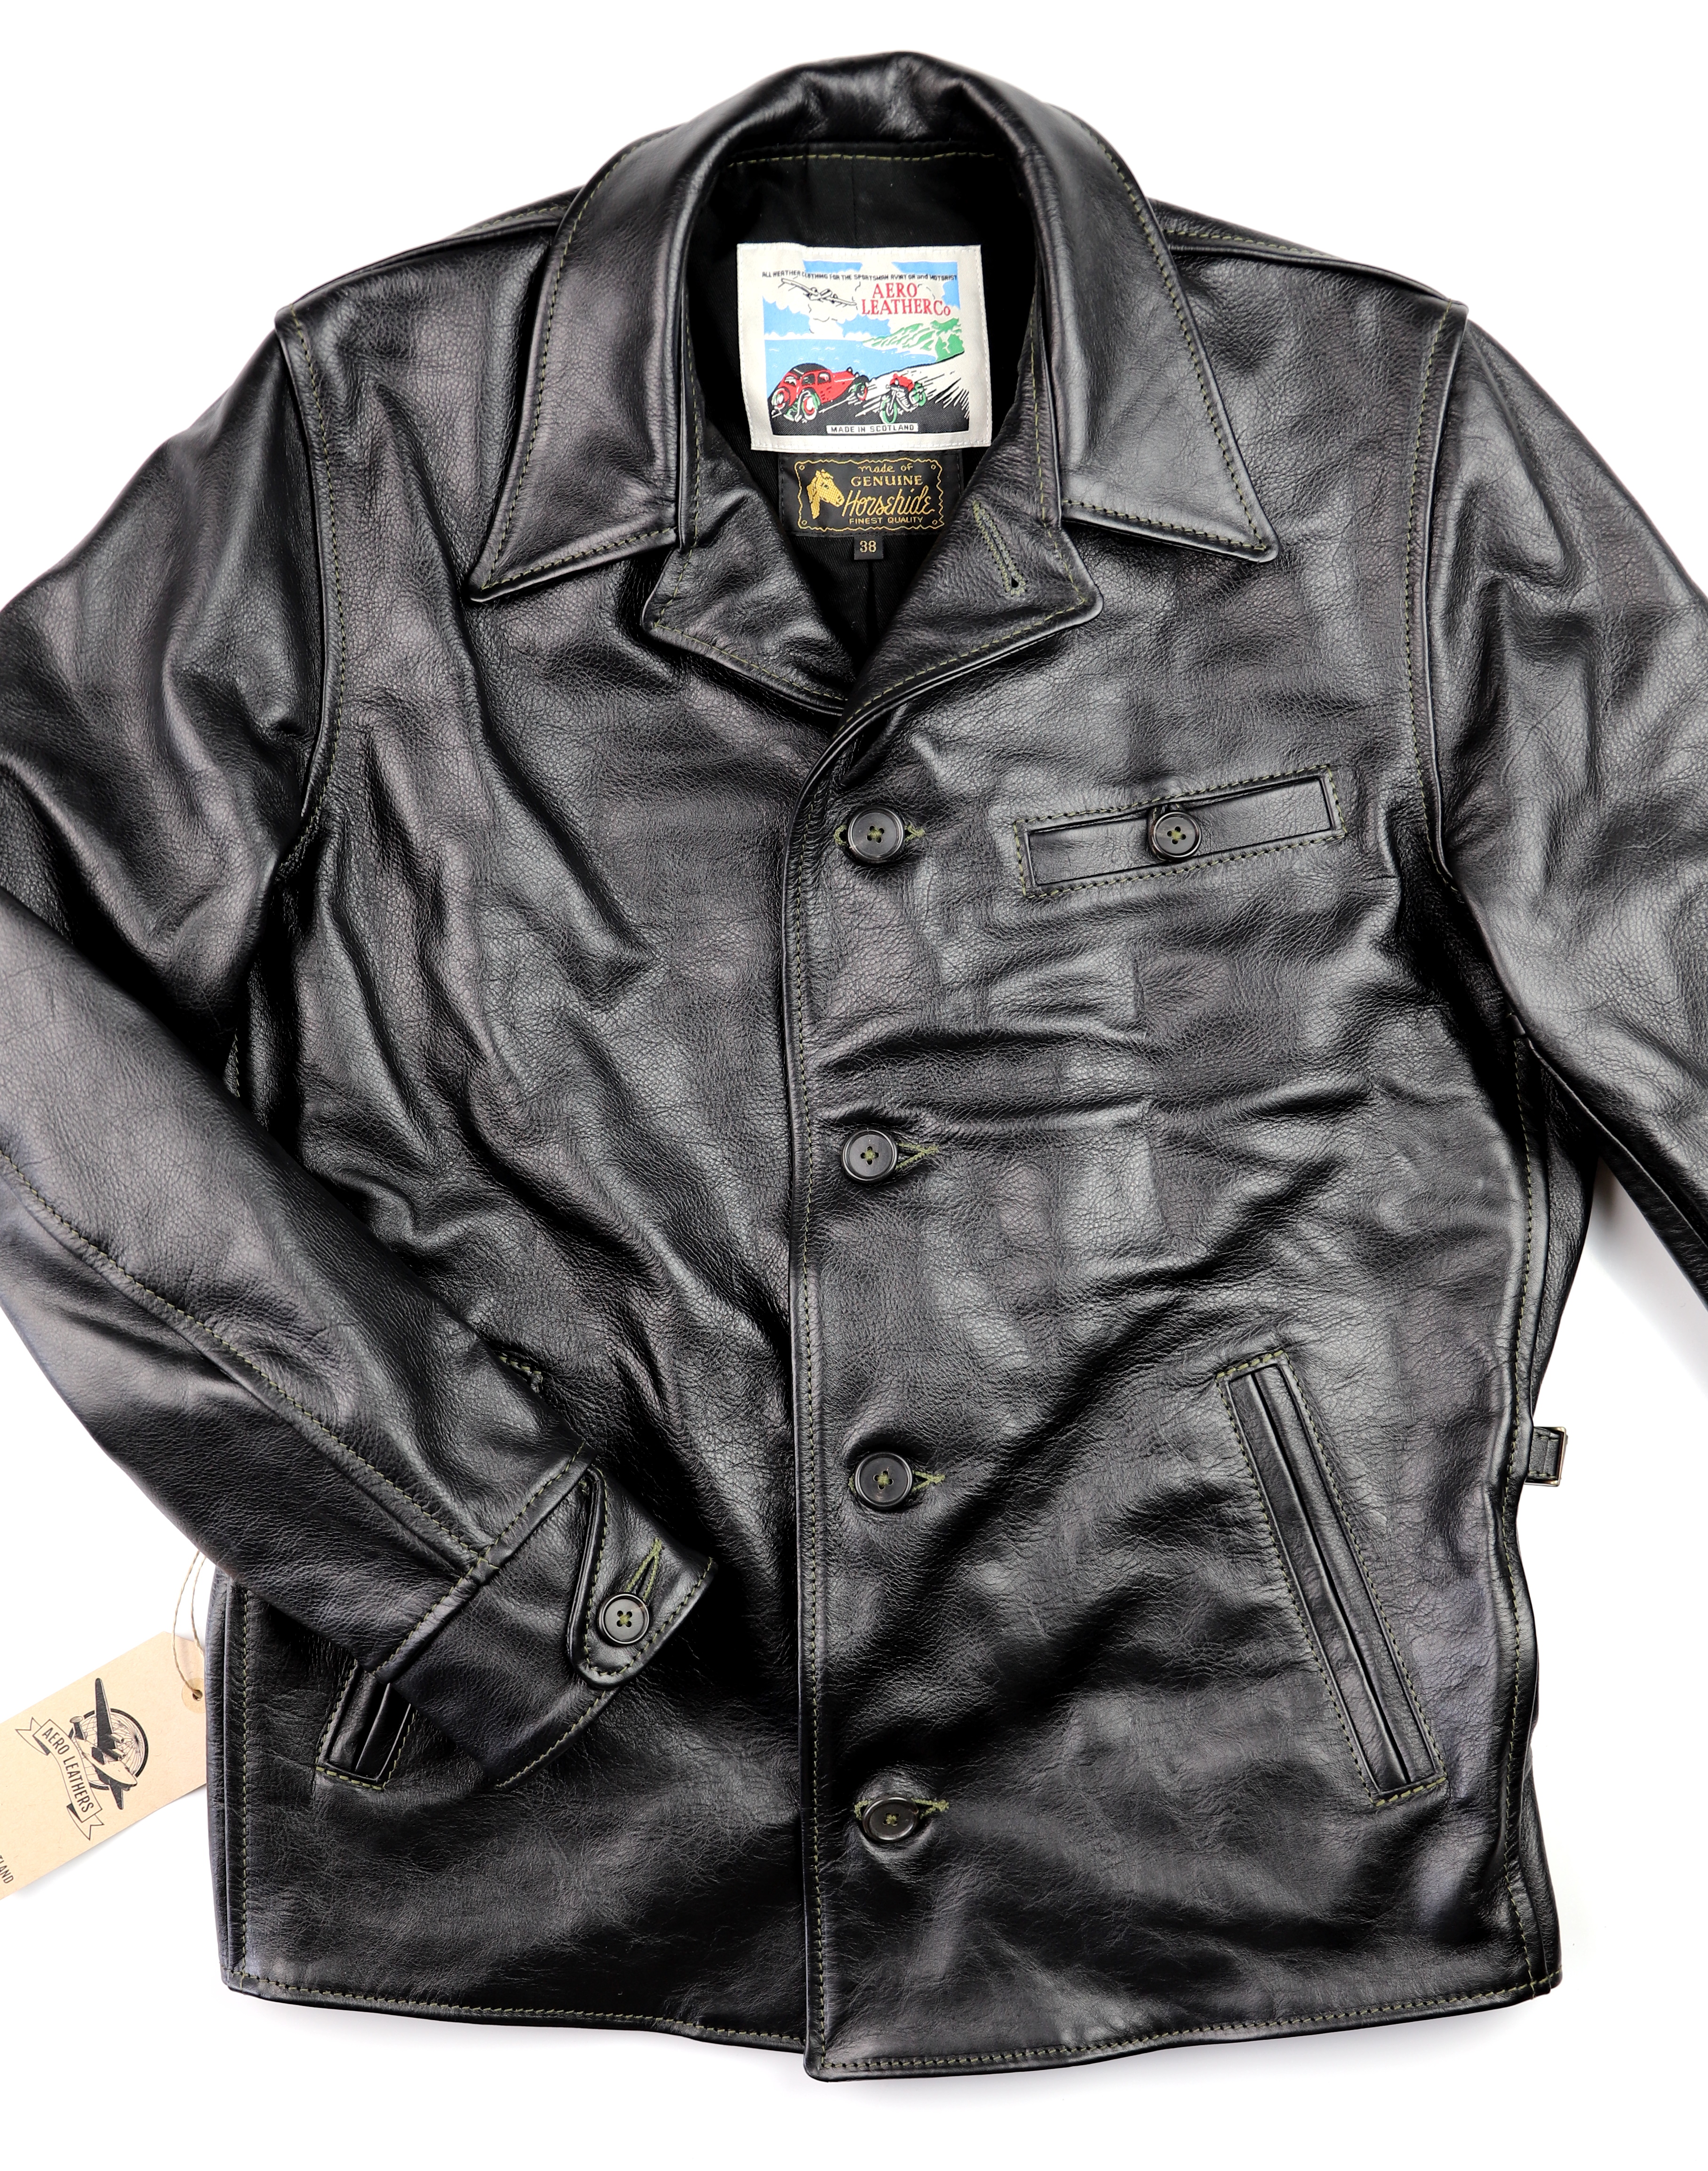 Aero Maxwell Black Vicenza Horsehide BY2 front.jpg